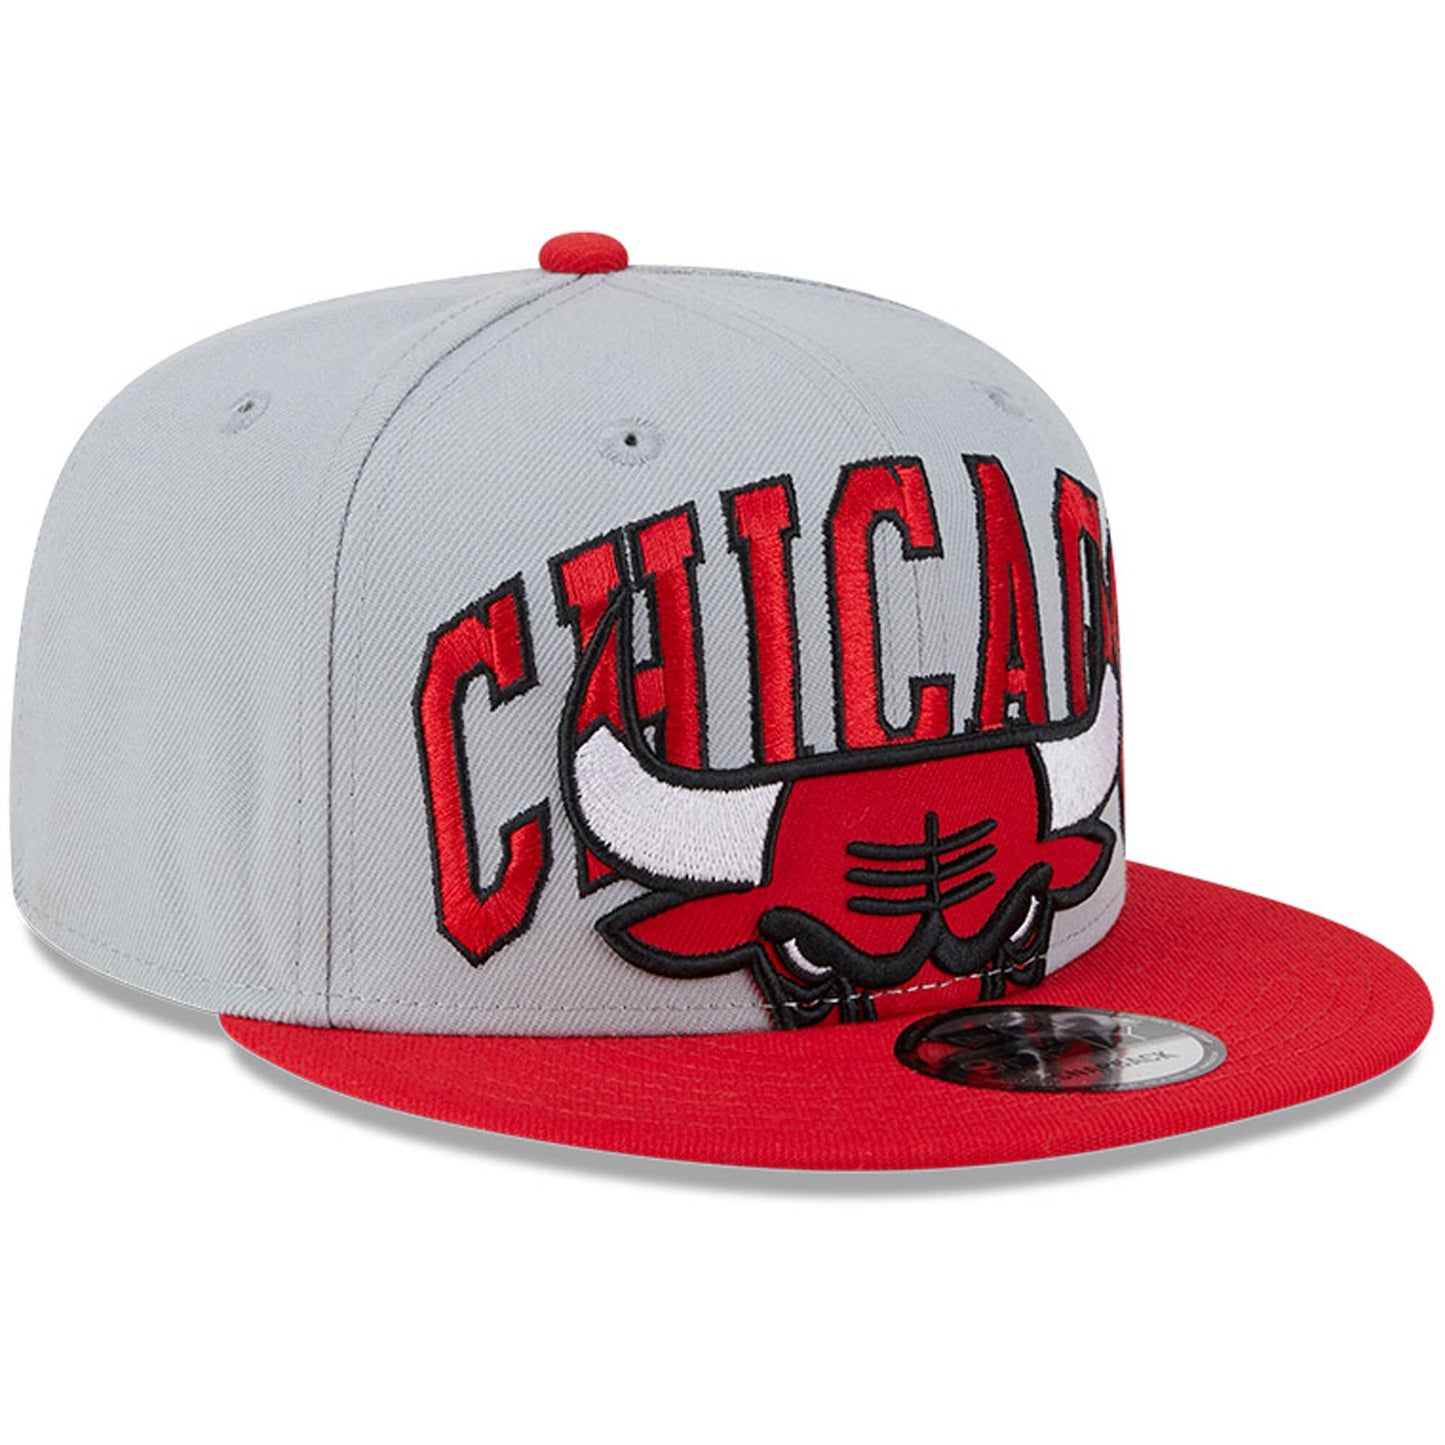 Men's Chicago Bulls New Era Gray/Red Tip-Off Two-Tone 9FIFTY Snapback Hat